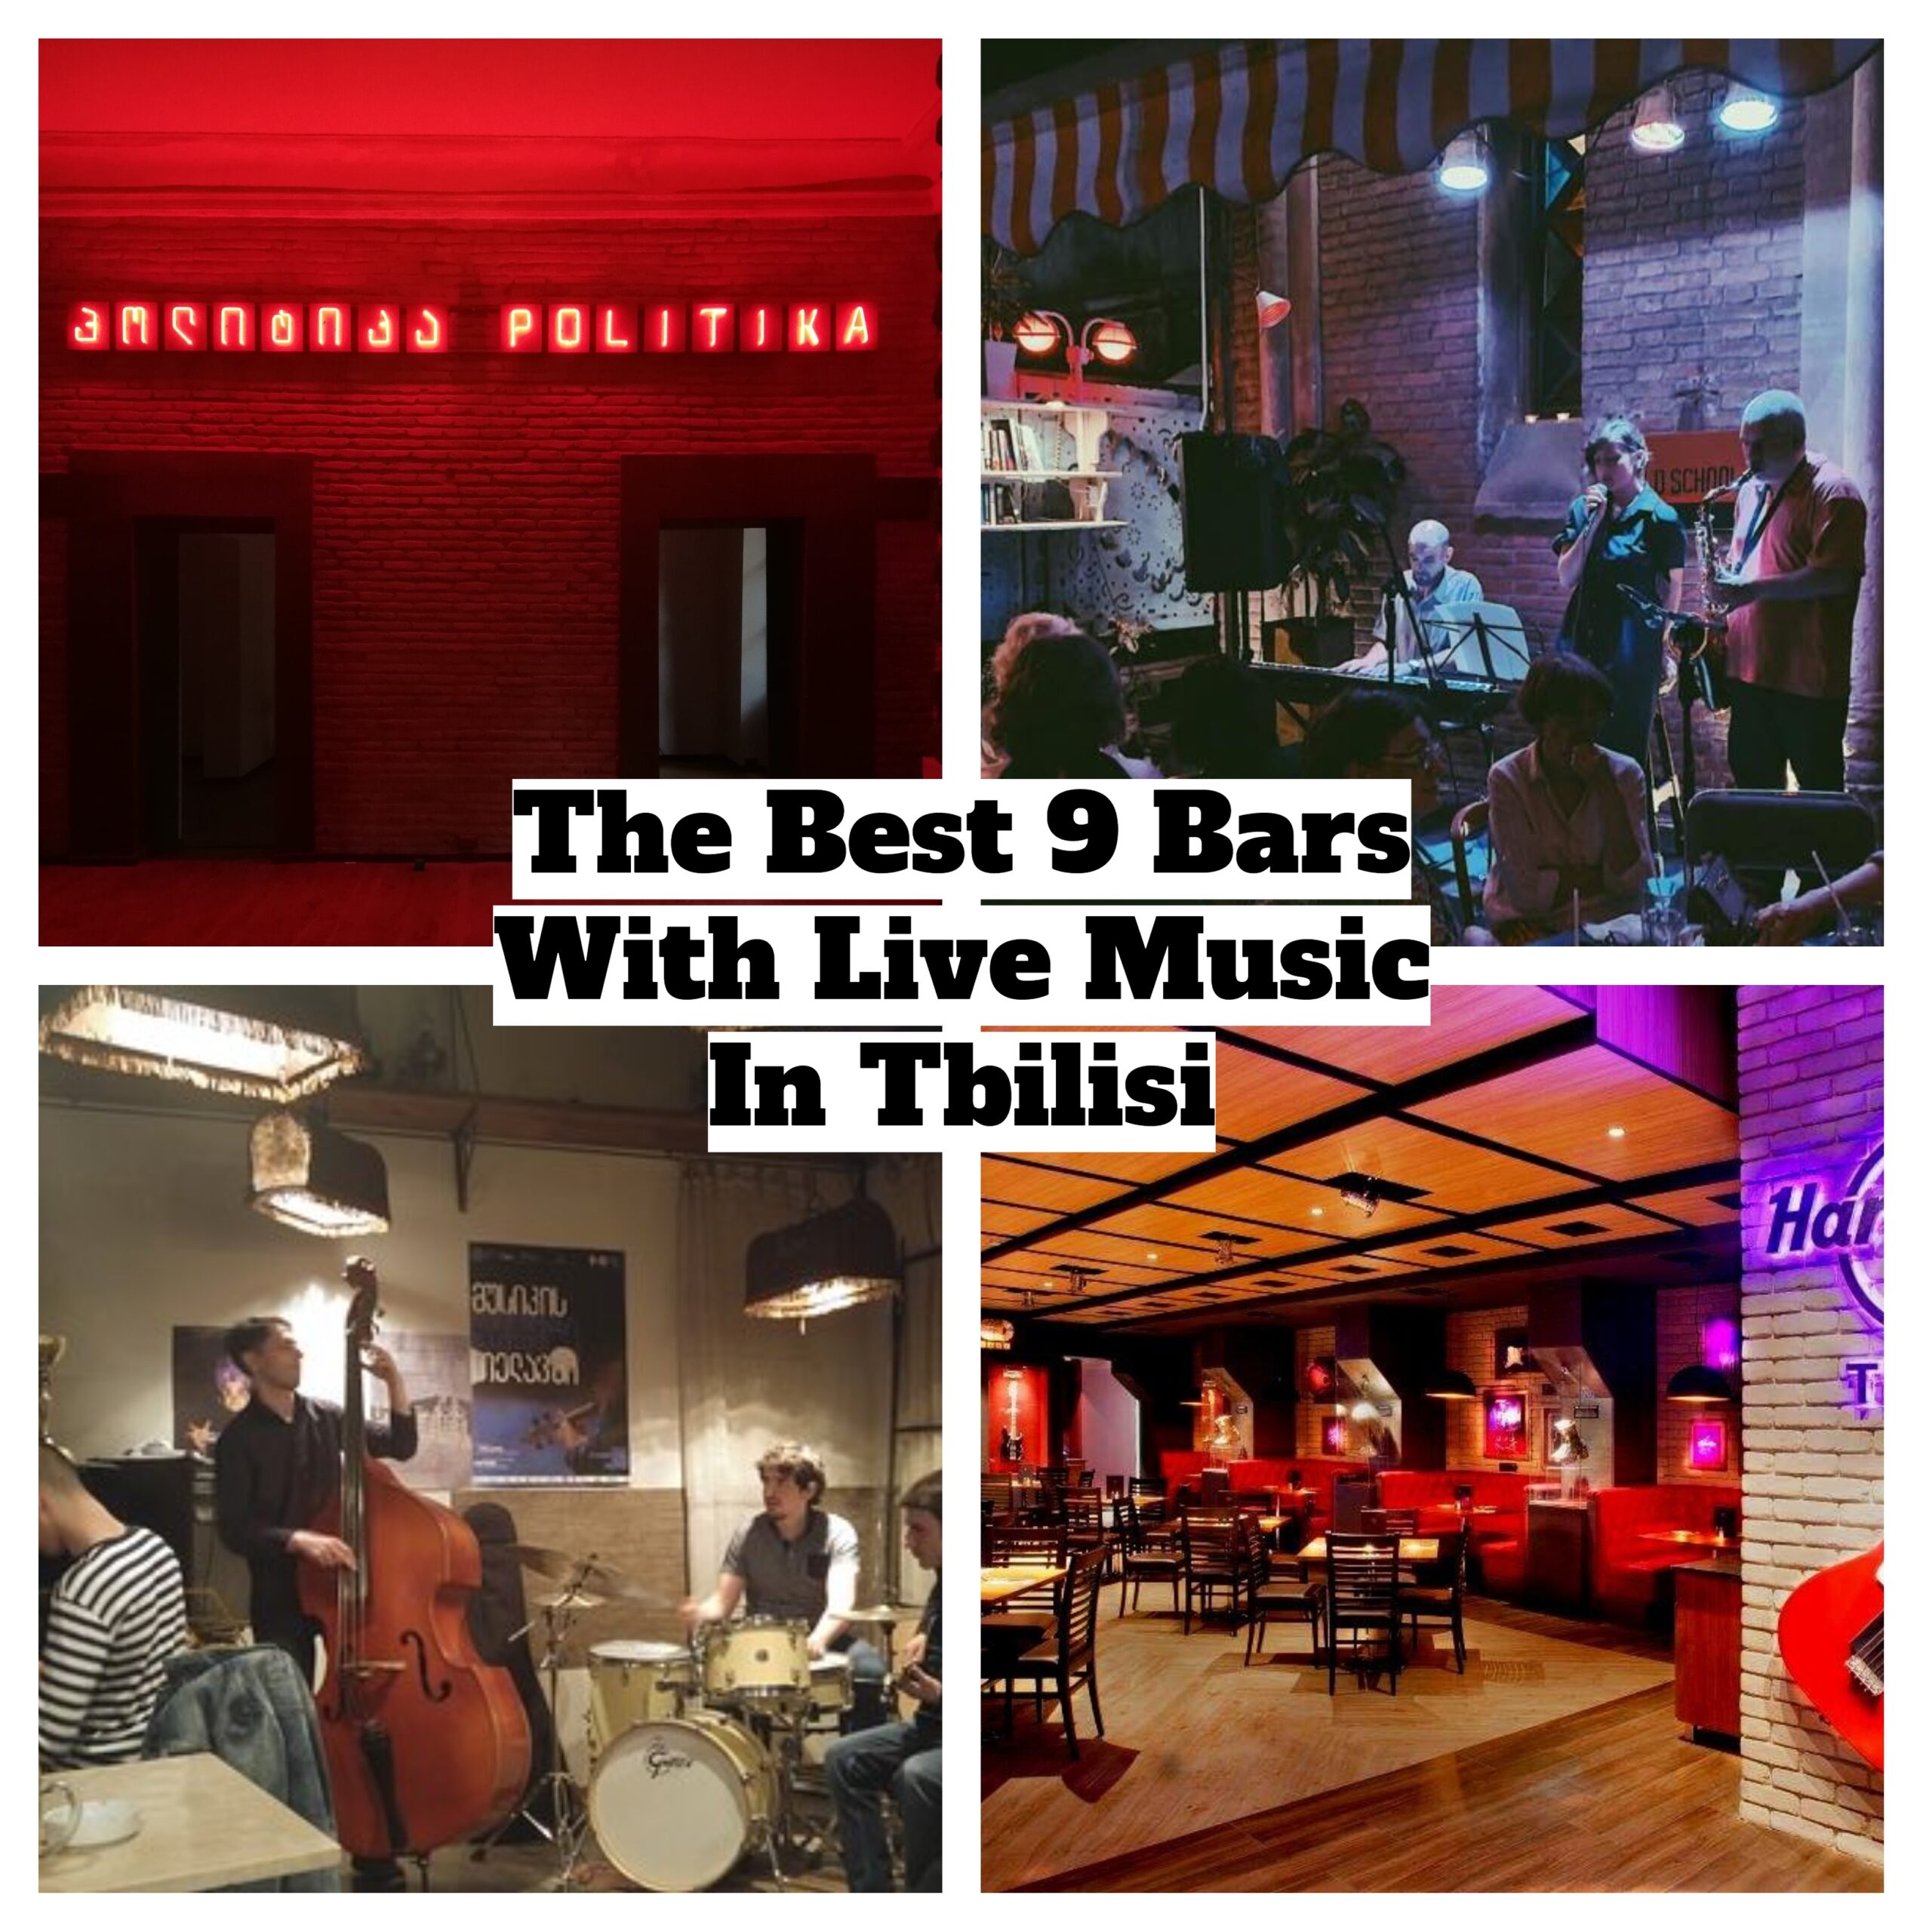 9 bars with live music in Tbilisi